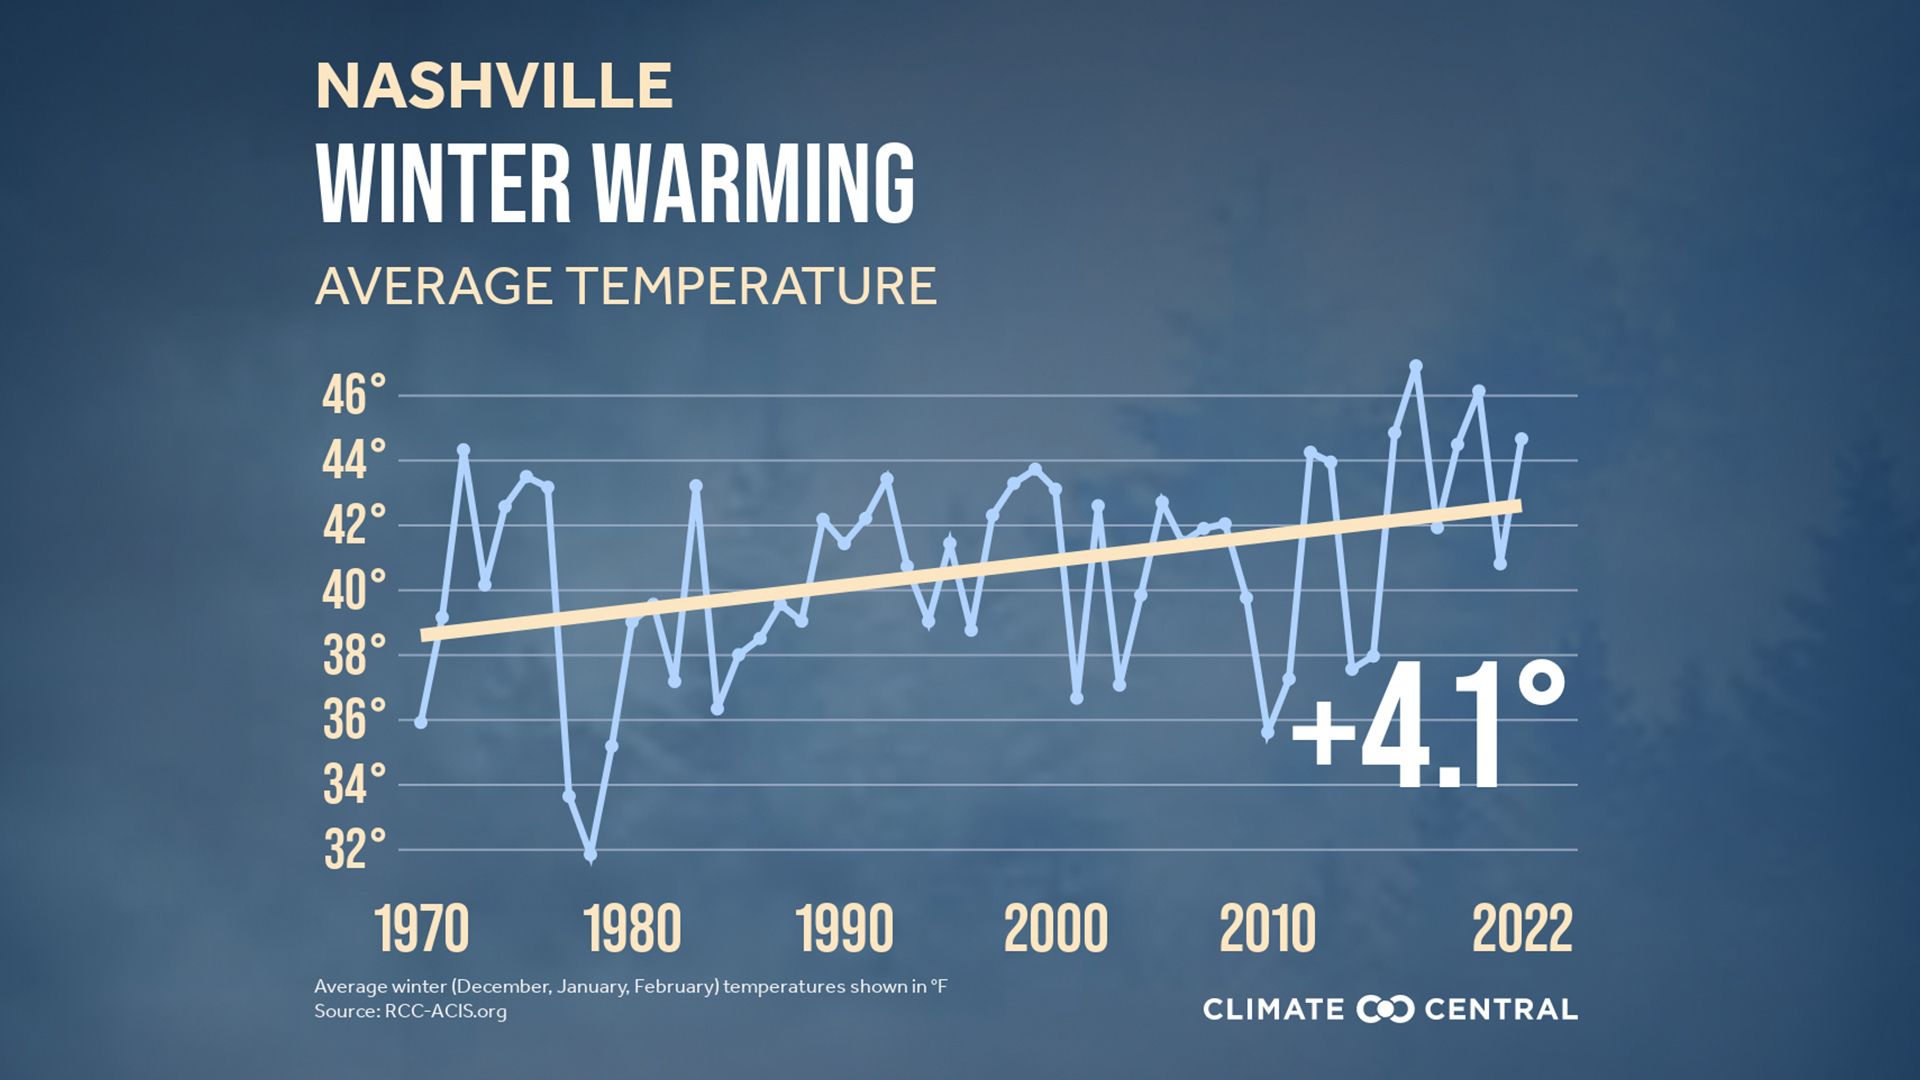 A chart showing winter temperatures in Nashville overtime, with a trend line showing a steady increase.